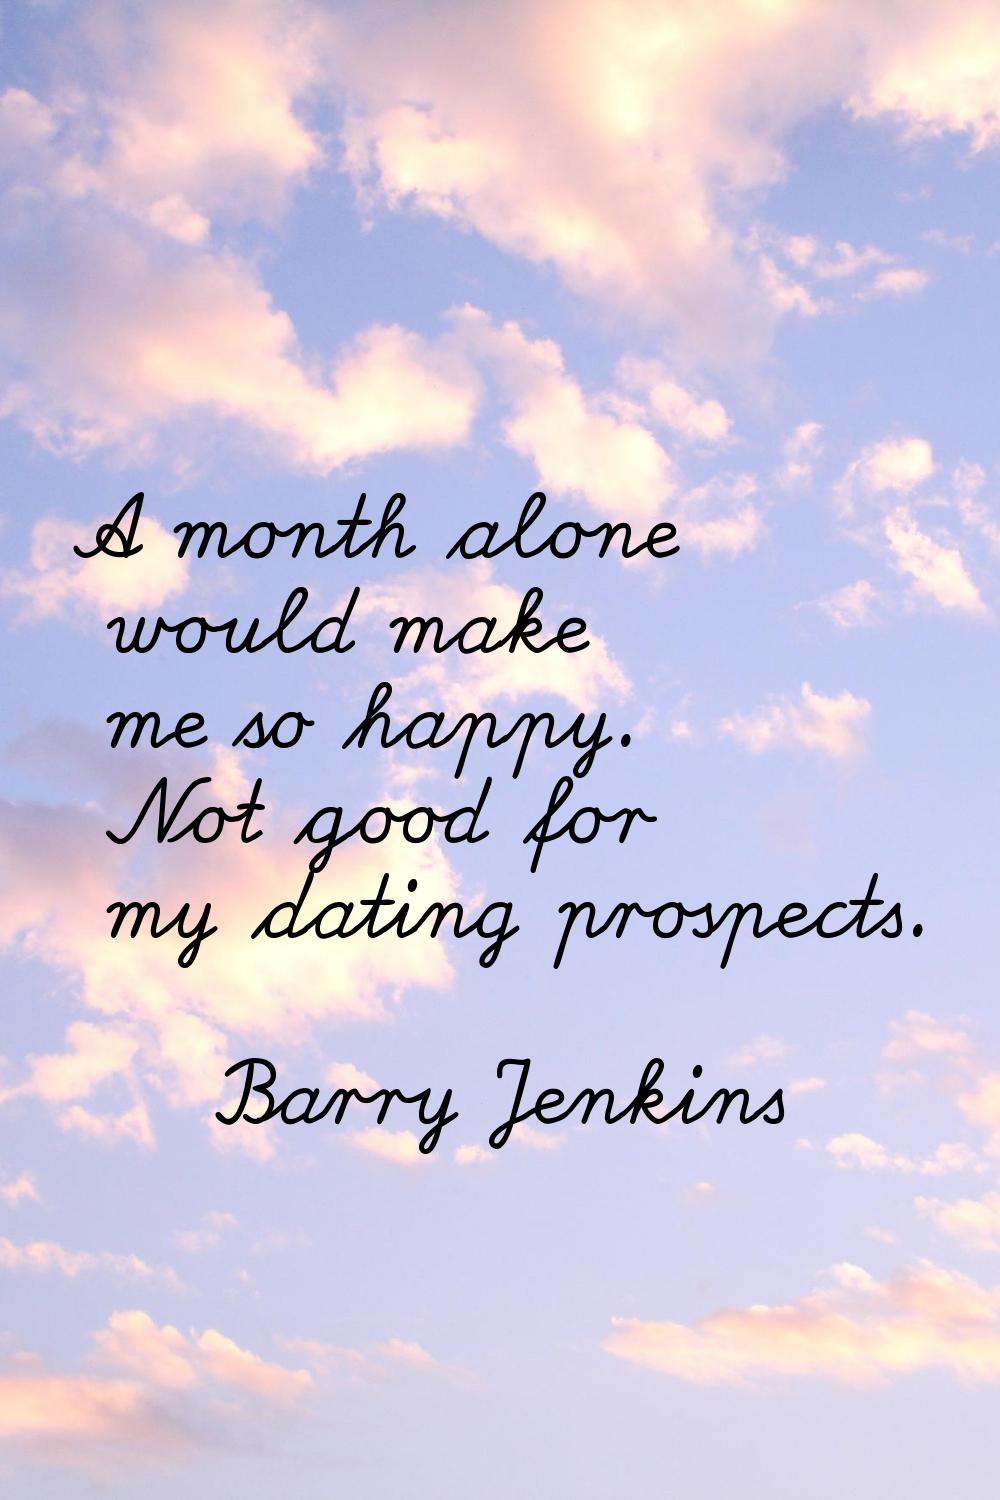 A month alone would make me so happy. Not good for my dating prospects.